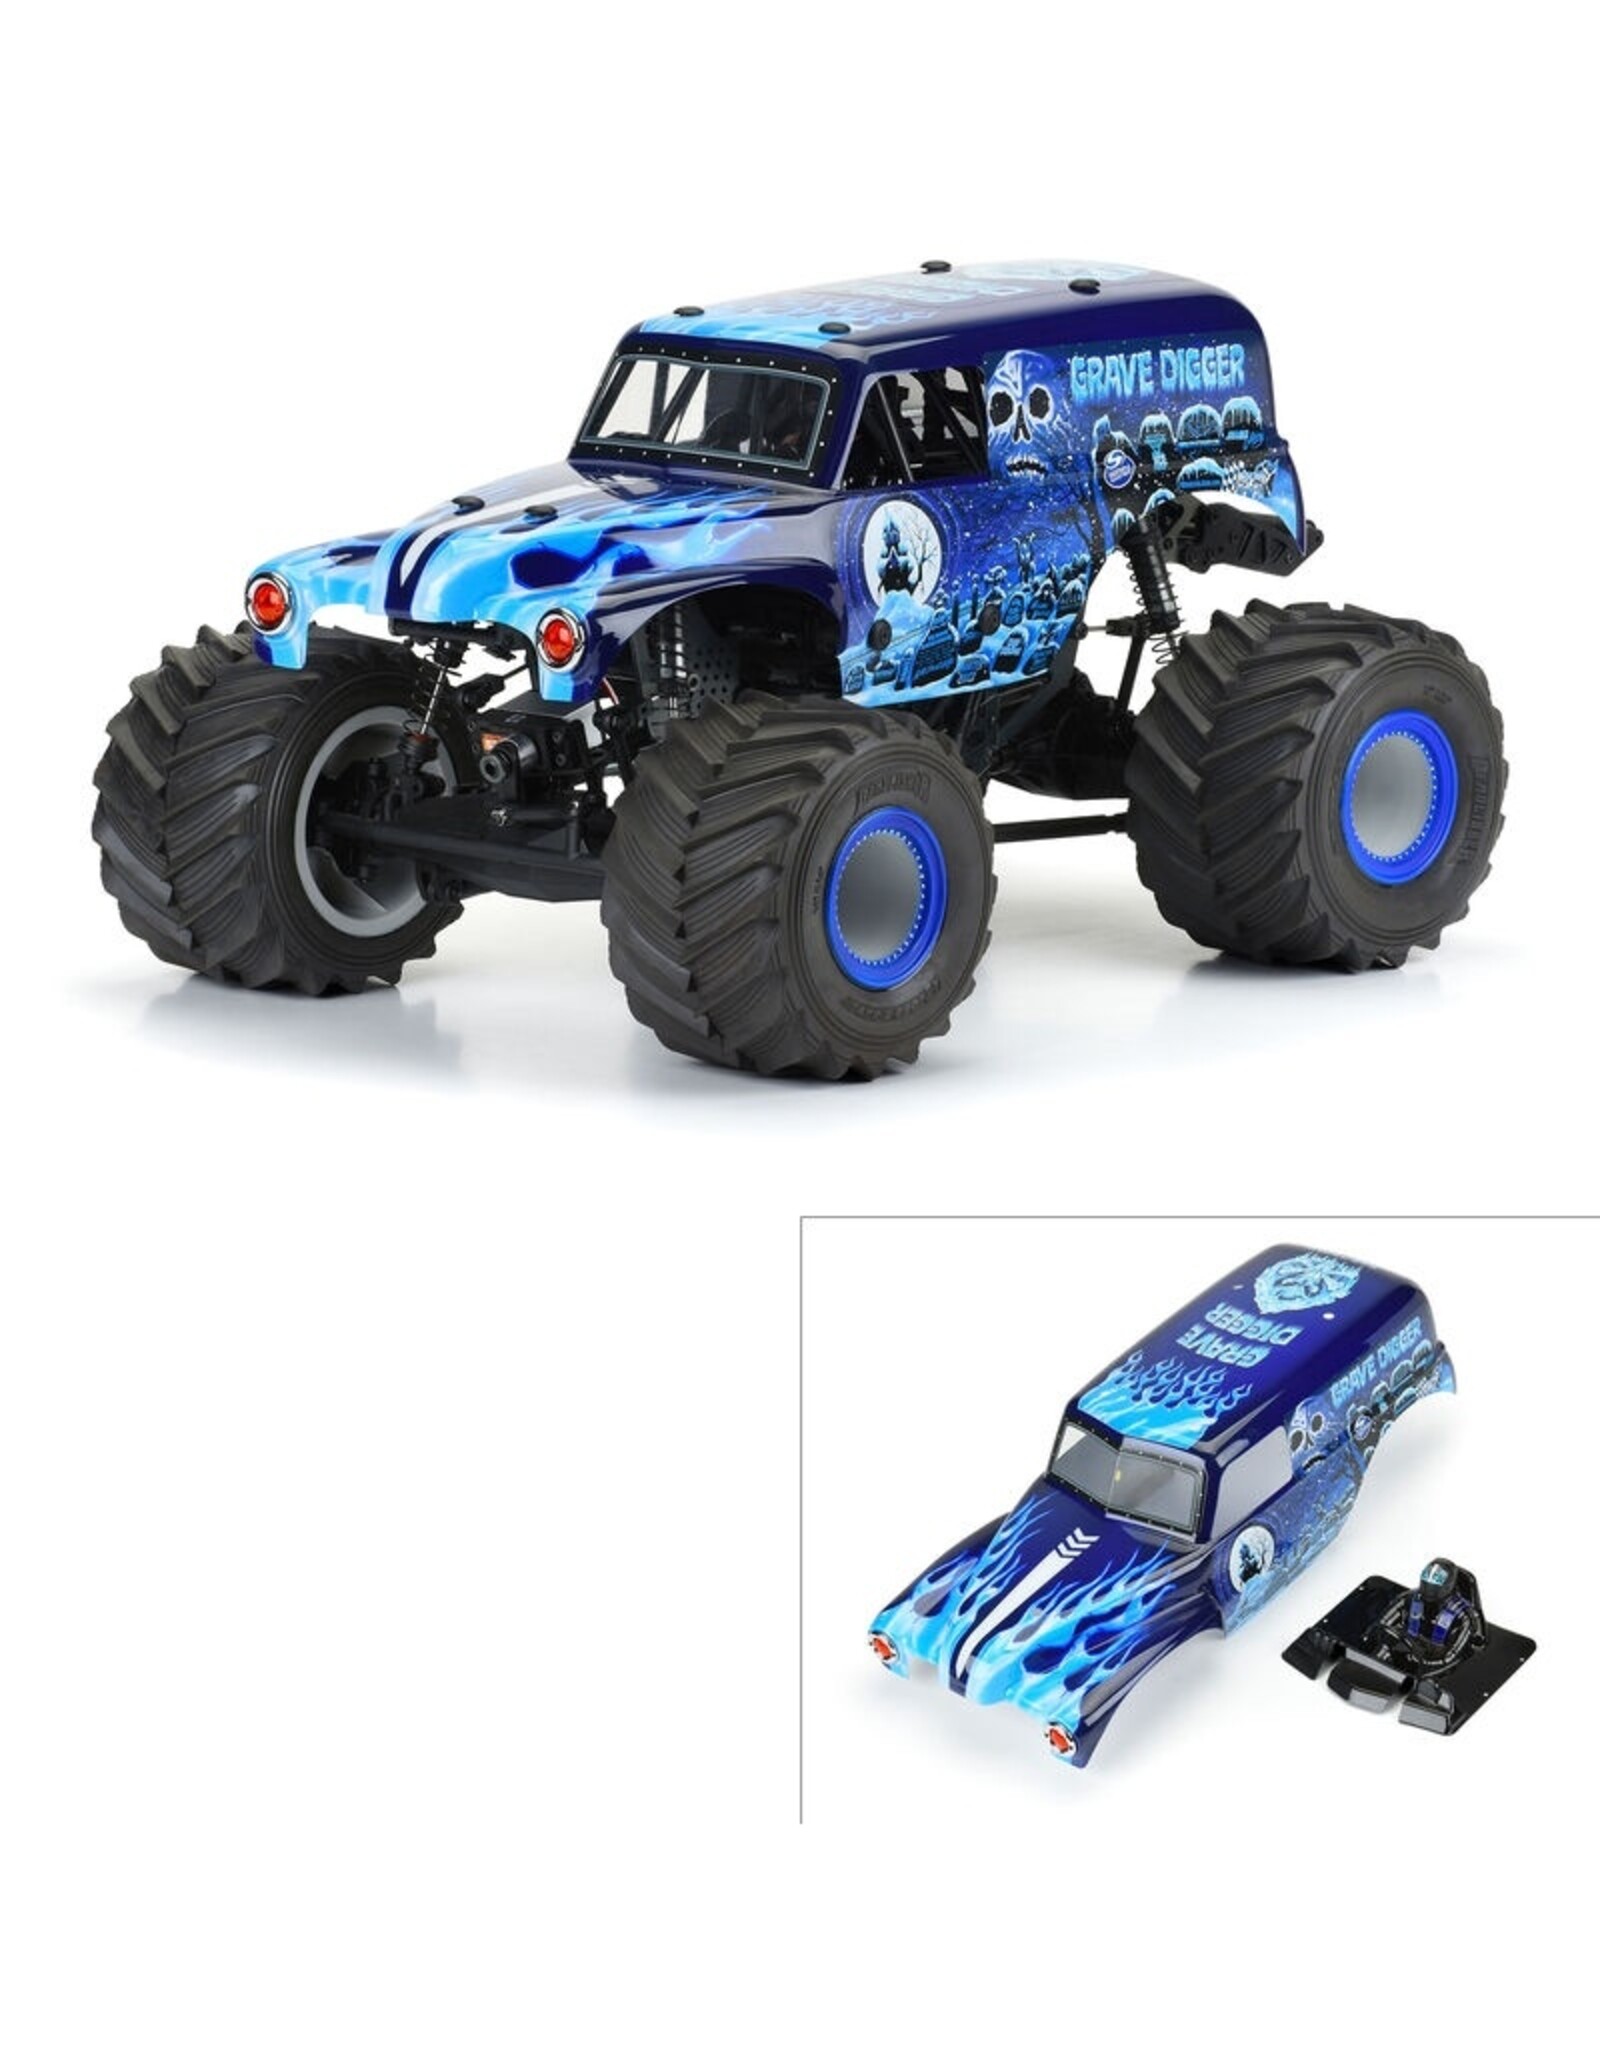 Pro-Line Racing PRO359313 1/10 Grave Digger Ice (Blue) Painted Body Set: LMT